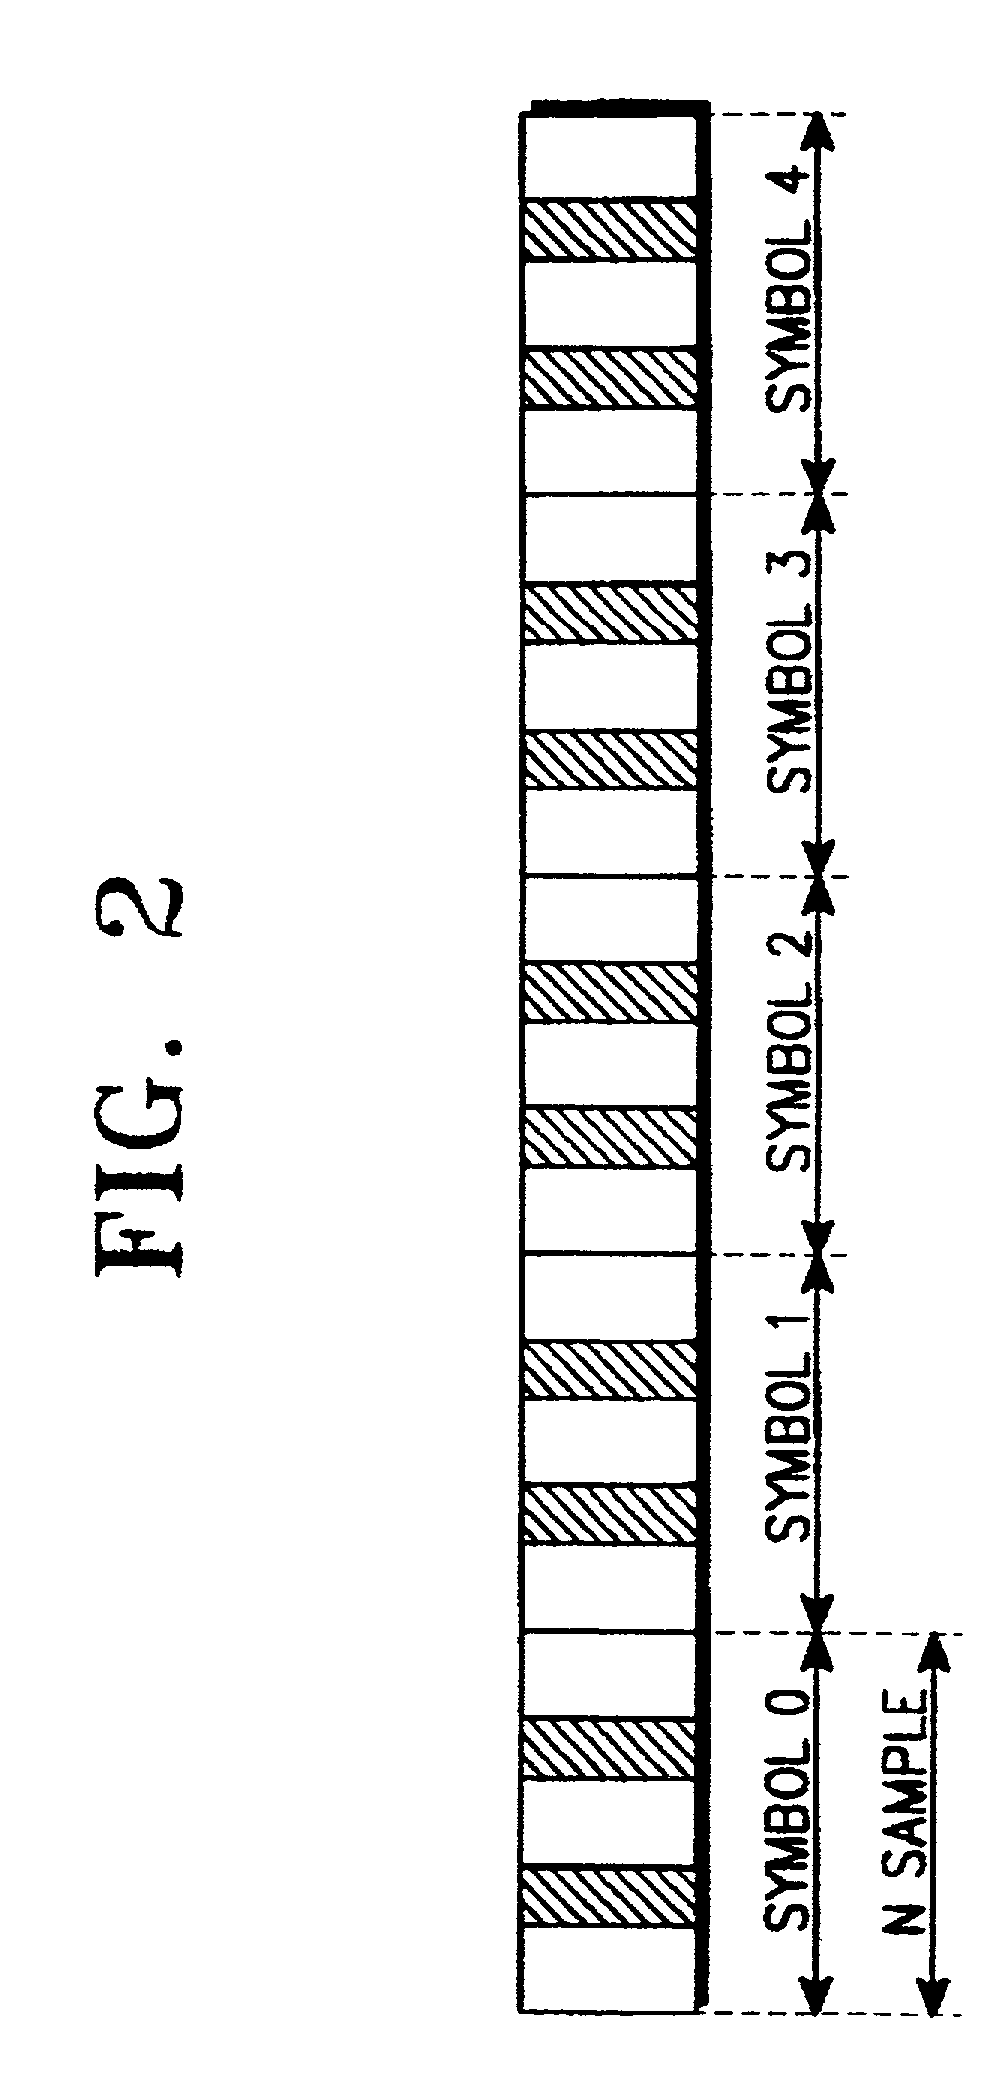 Apparatus of compensating for frequency offset using pilot symbol in an orthogonal frequency division multiplexing system